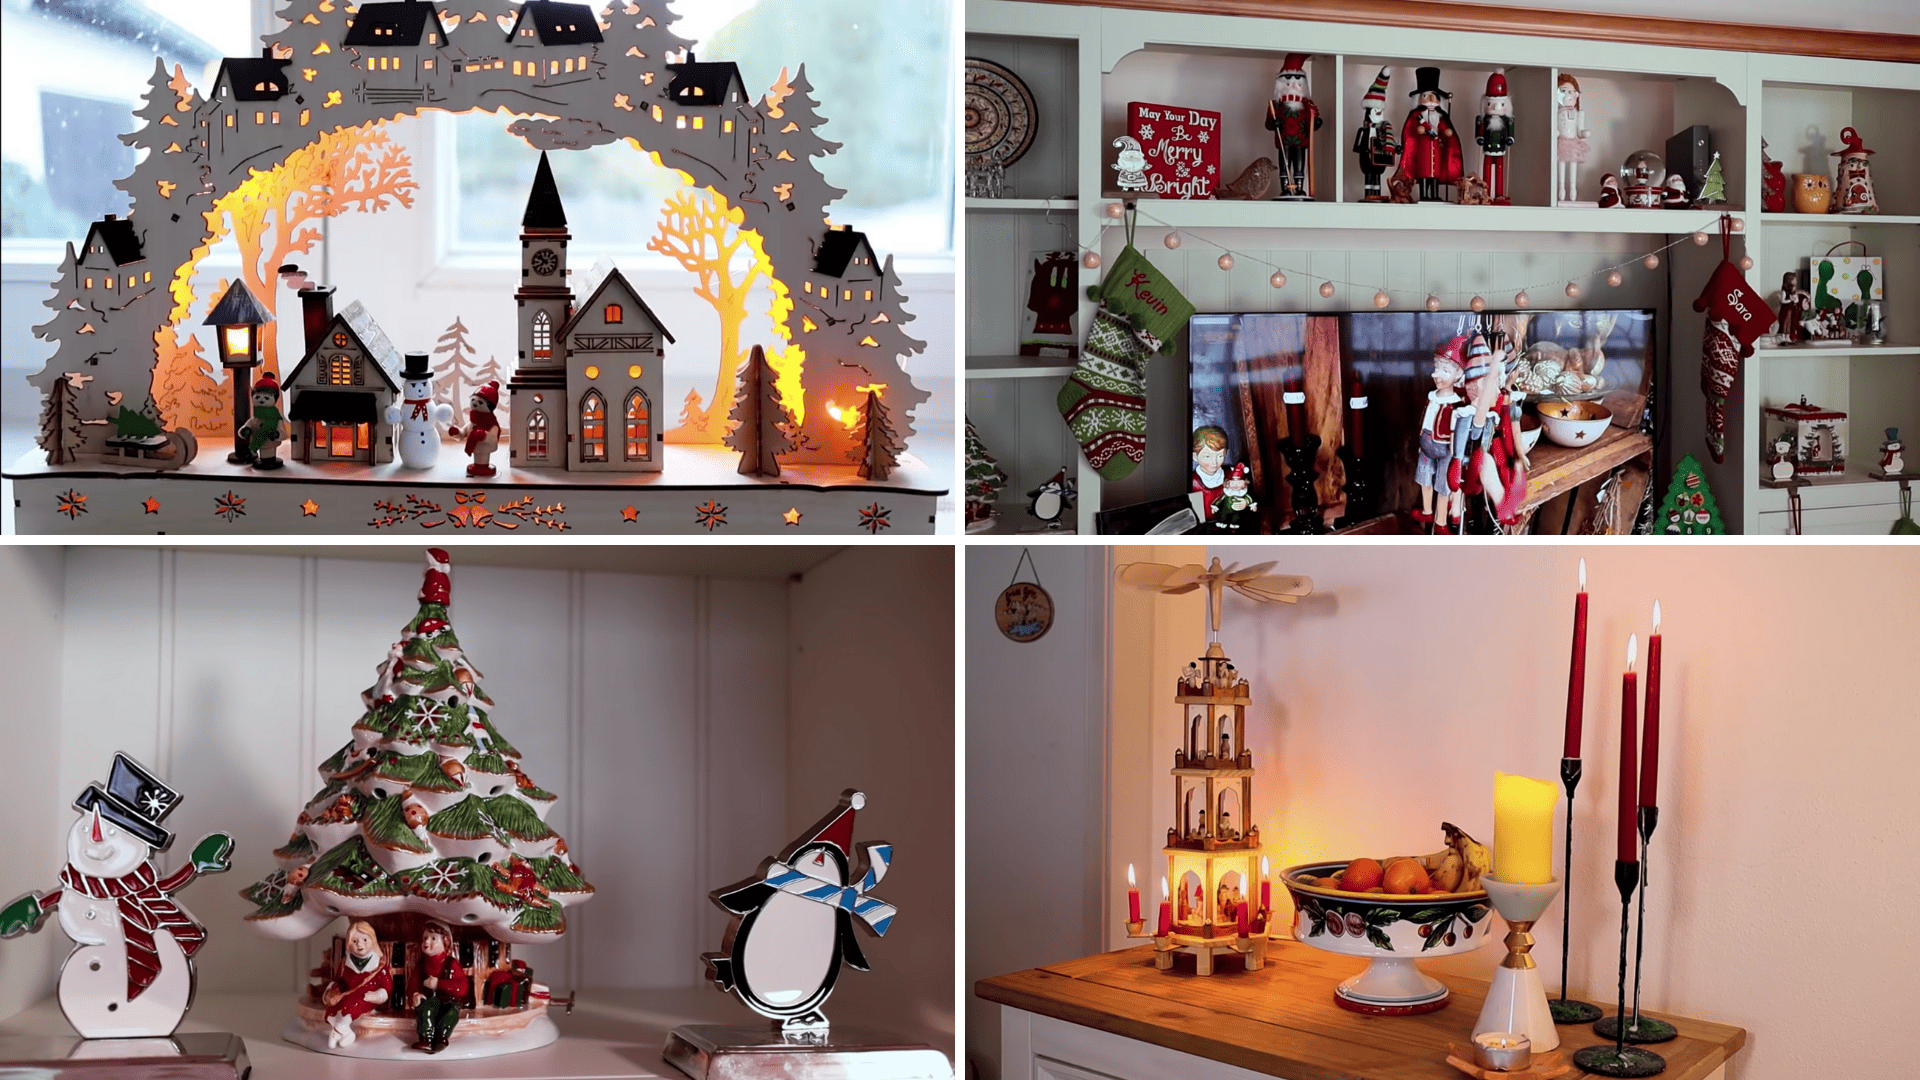 German Christmas Decorations We’ve Never Had Before | My Merry Messy German Life